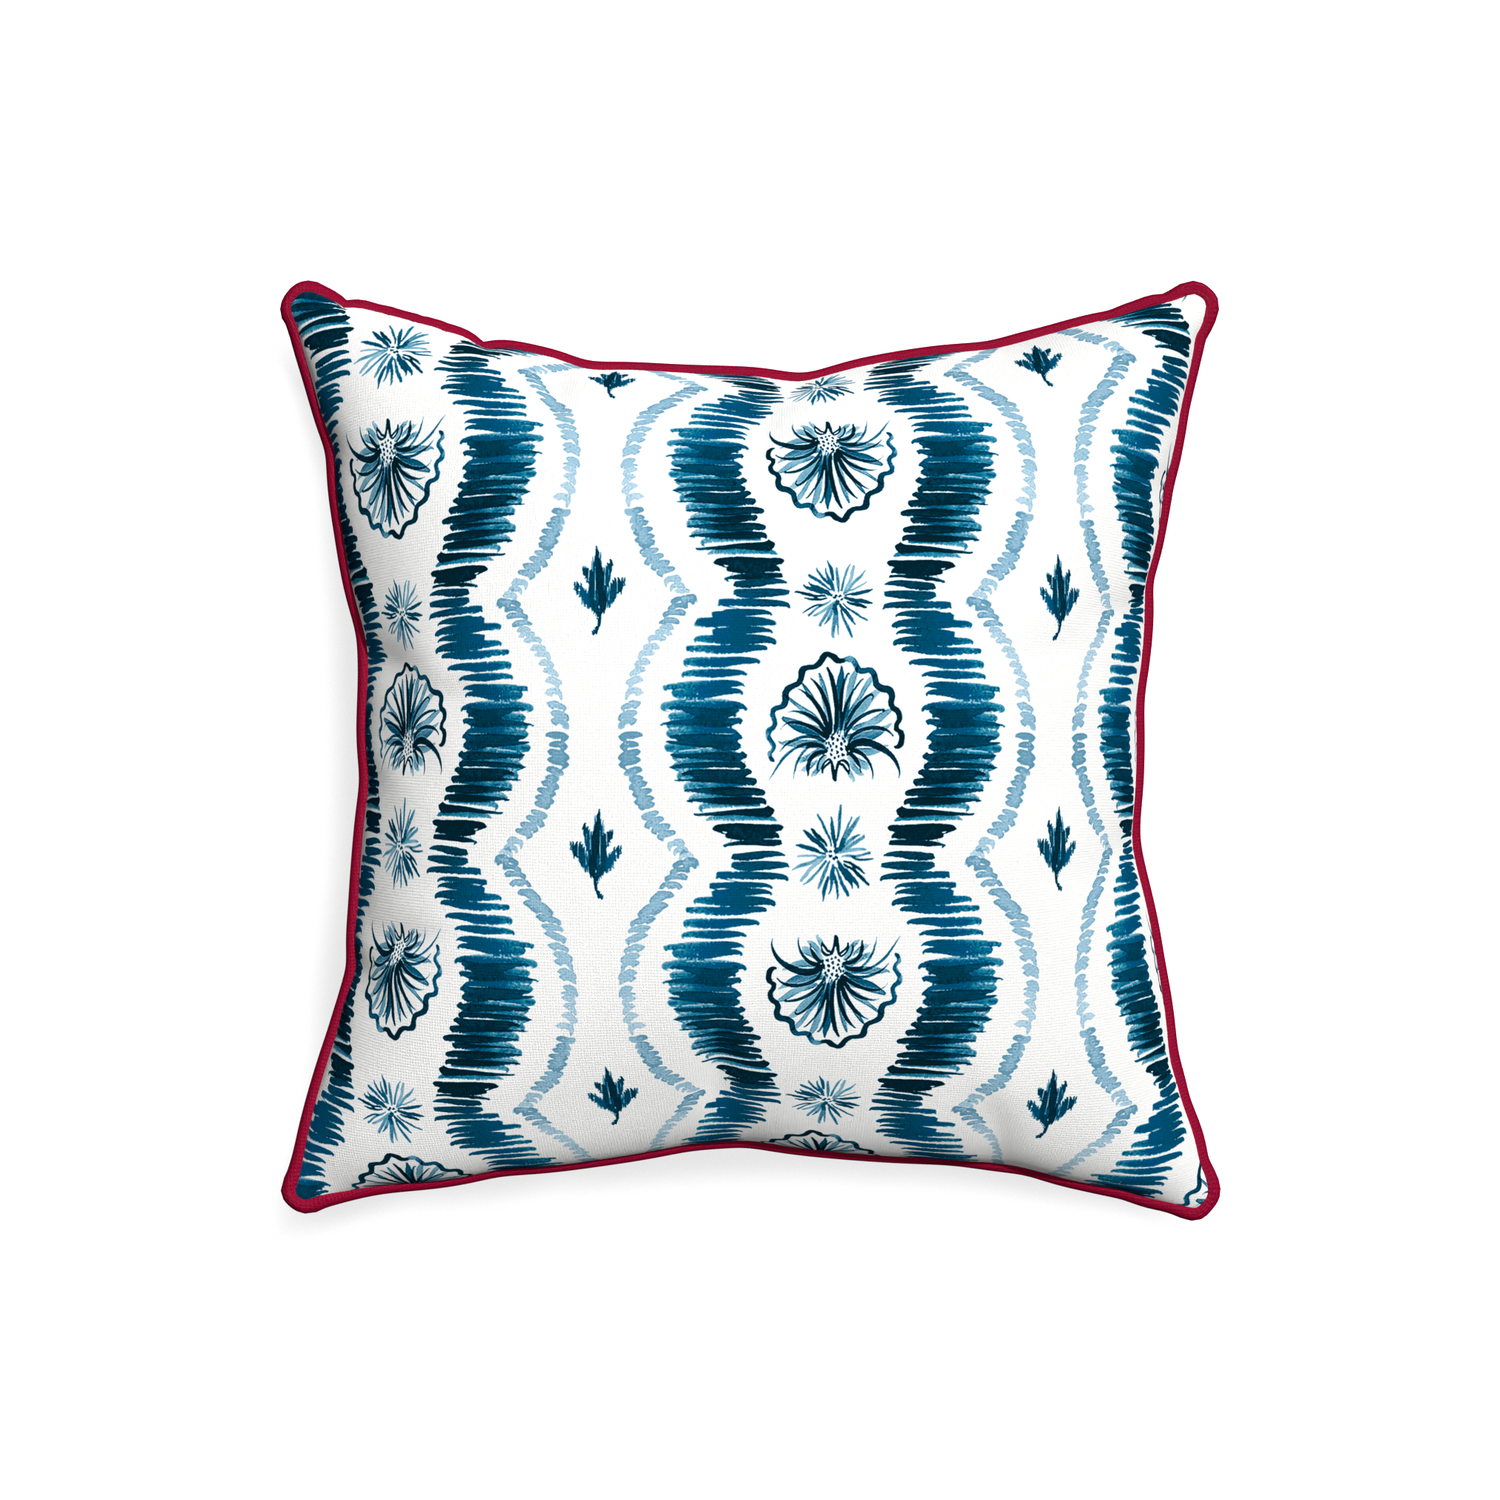 20-square alice custom blue ikatpillow with raspberry piping on white background